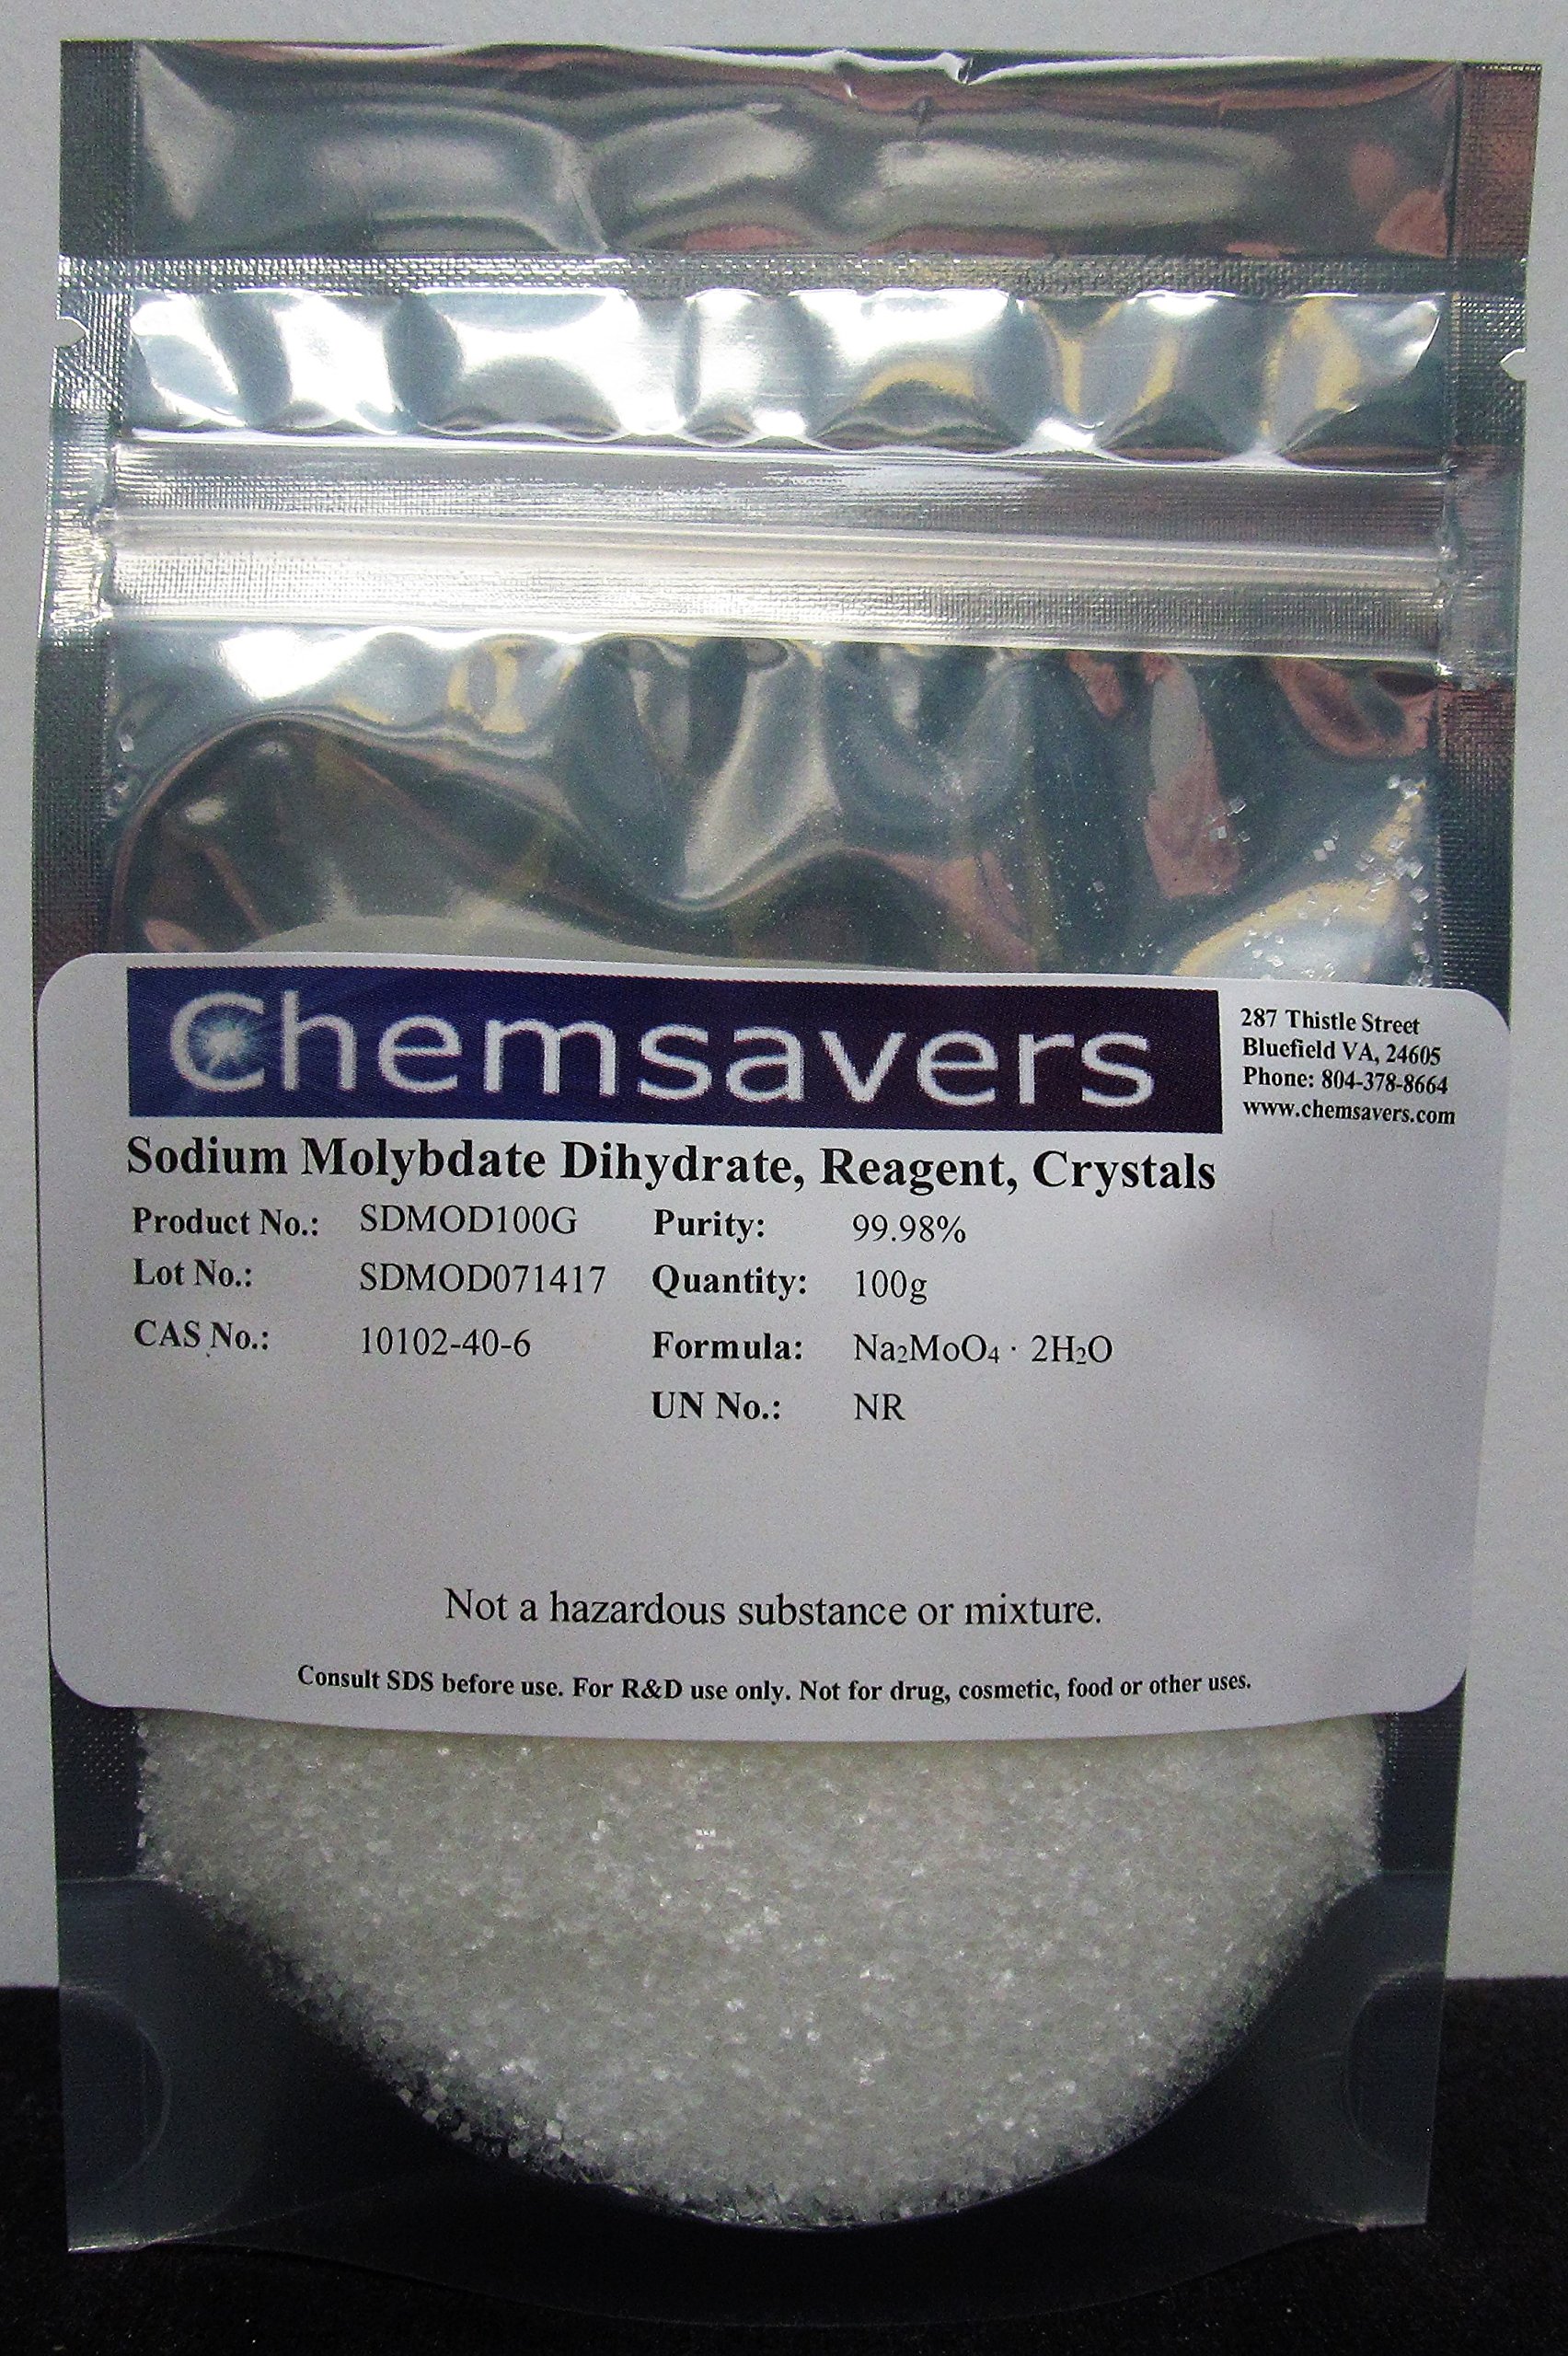 Sodium Molybdate Dihydrate, Reagent, 99.98%, Crystals, 100g